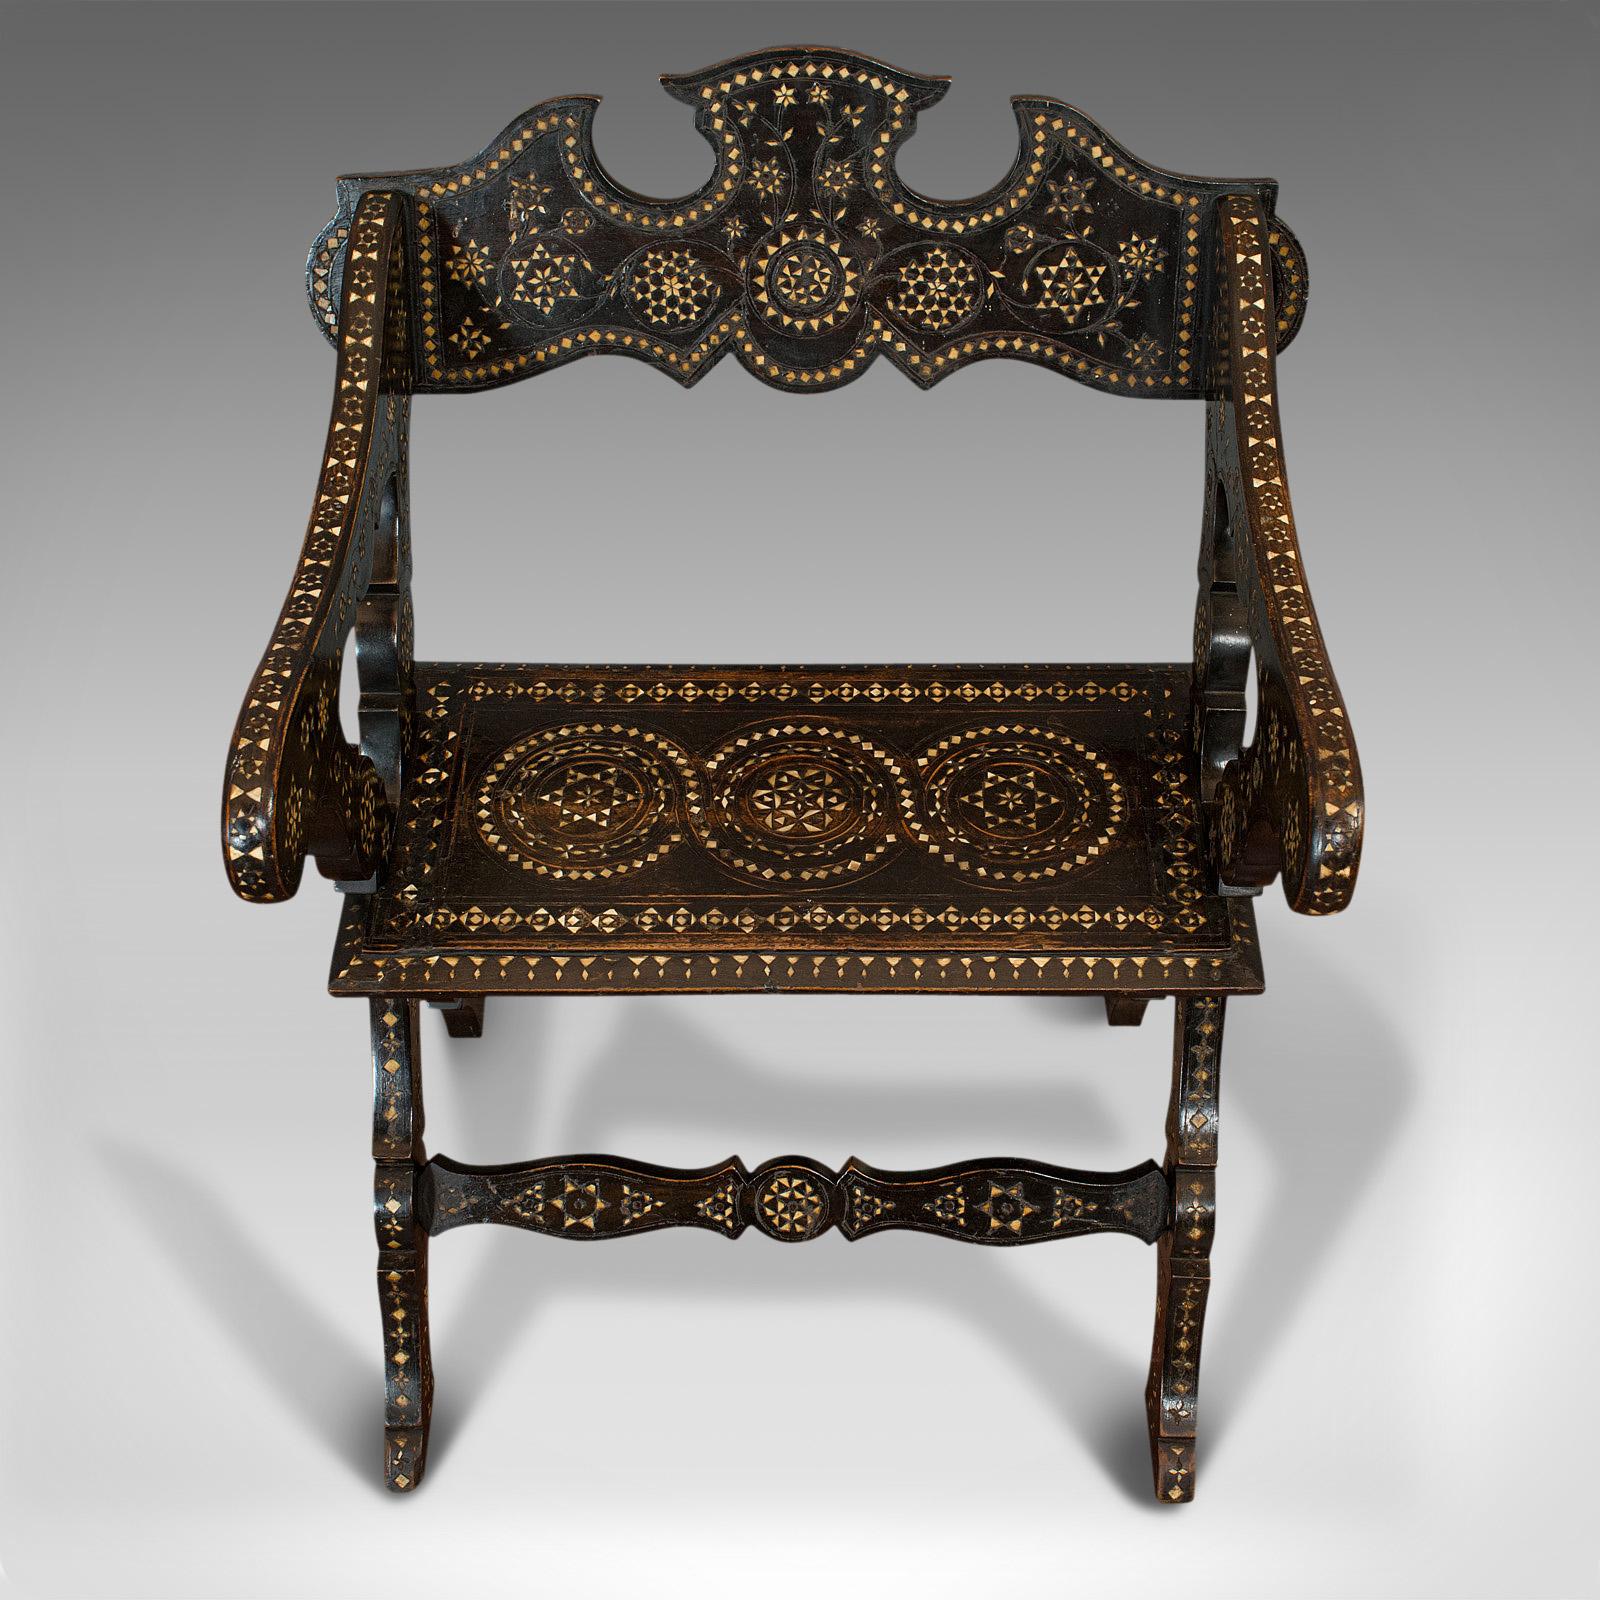 Antique X-Frame Chair, Middle Eastern, Mahogany, Seat, Bone Inlay, circa 1850 In Good Condition For Sale In Hele, Devon, GB